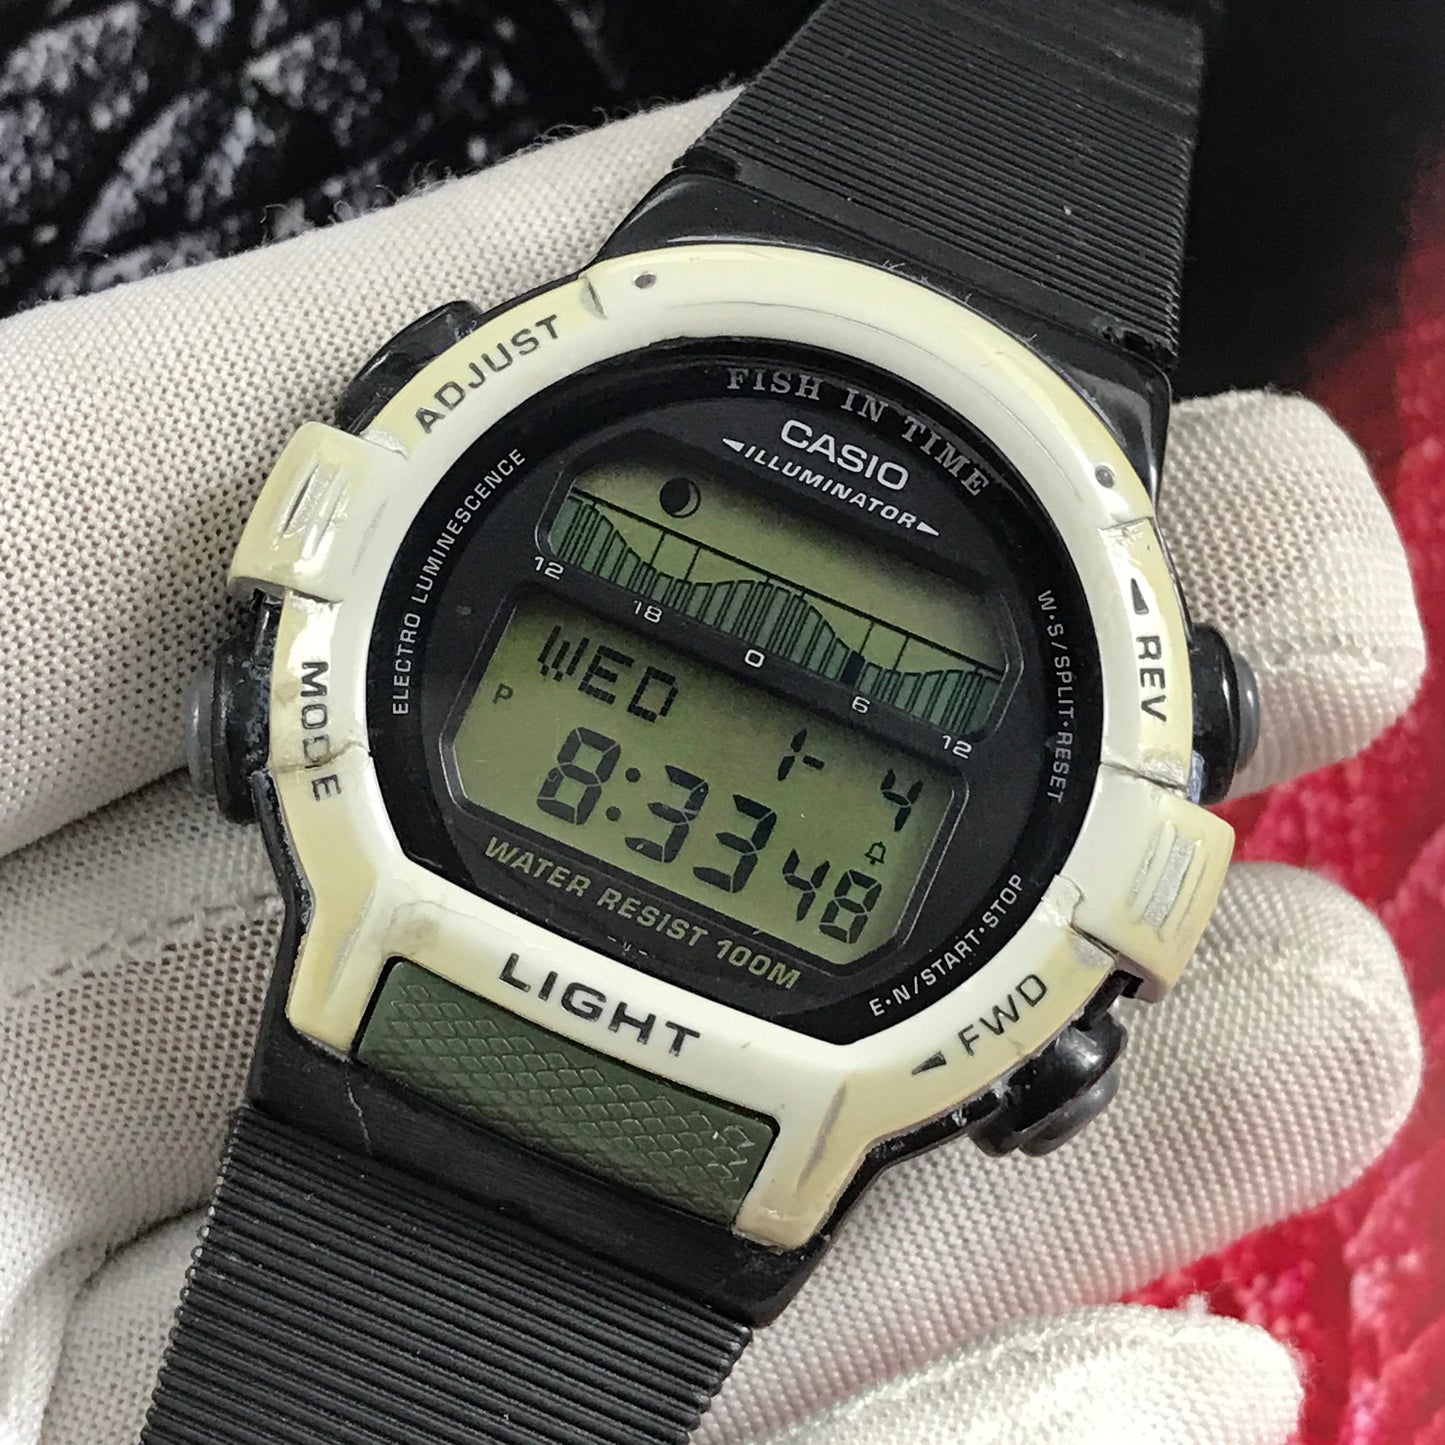 Vintage Casio FT-200 Digital Forester "Fish In Time" 1990s Men's Watch Mod. 1879